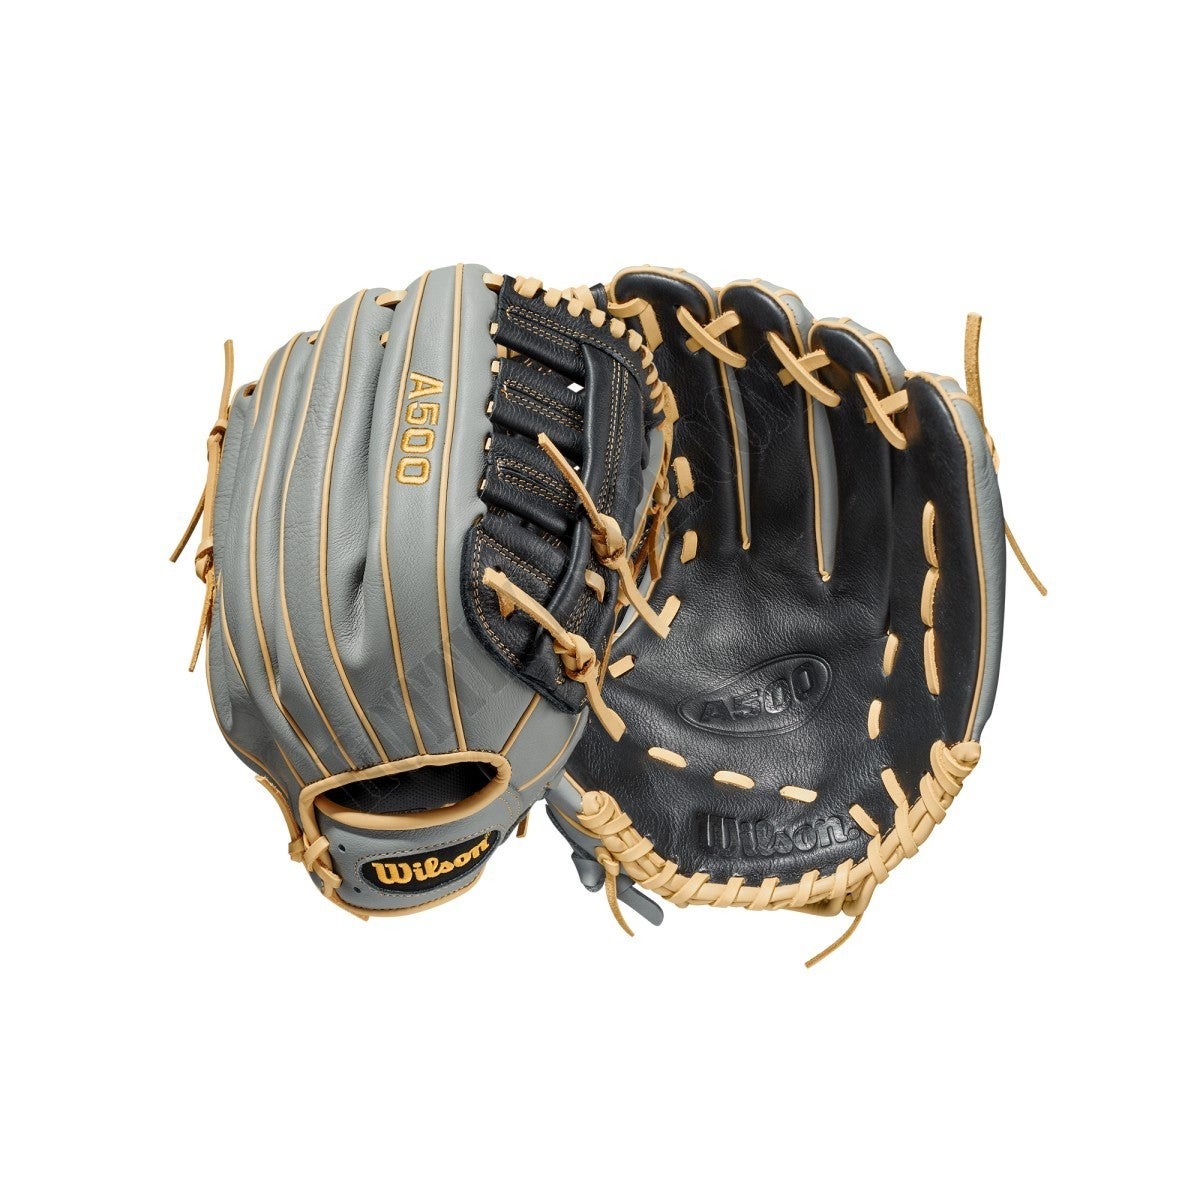 2021 A500 12.5" Outfield Baseball Glove ● Wilson Promotions - -0